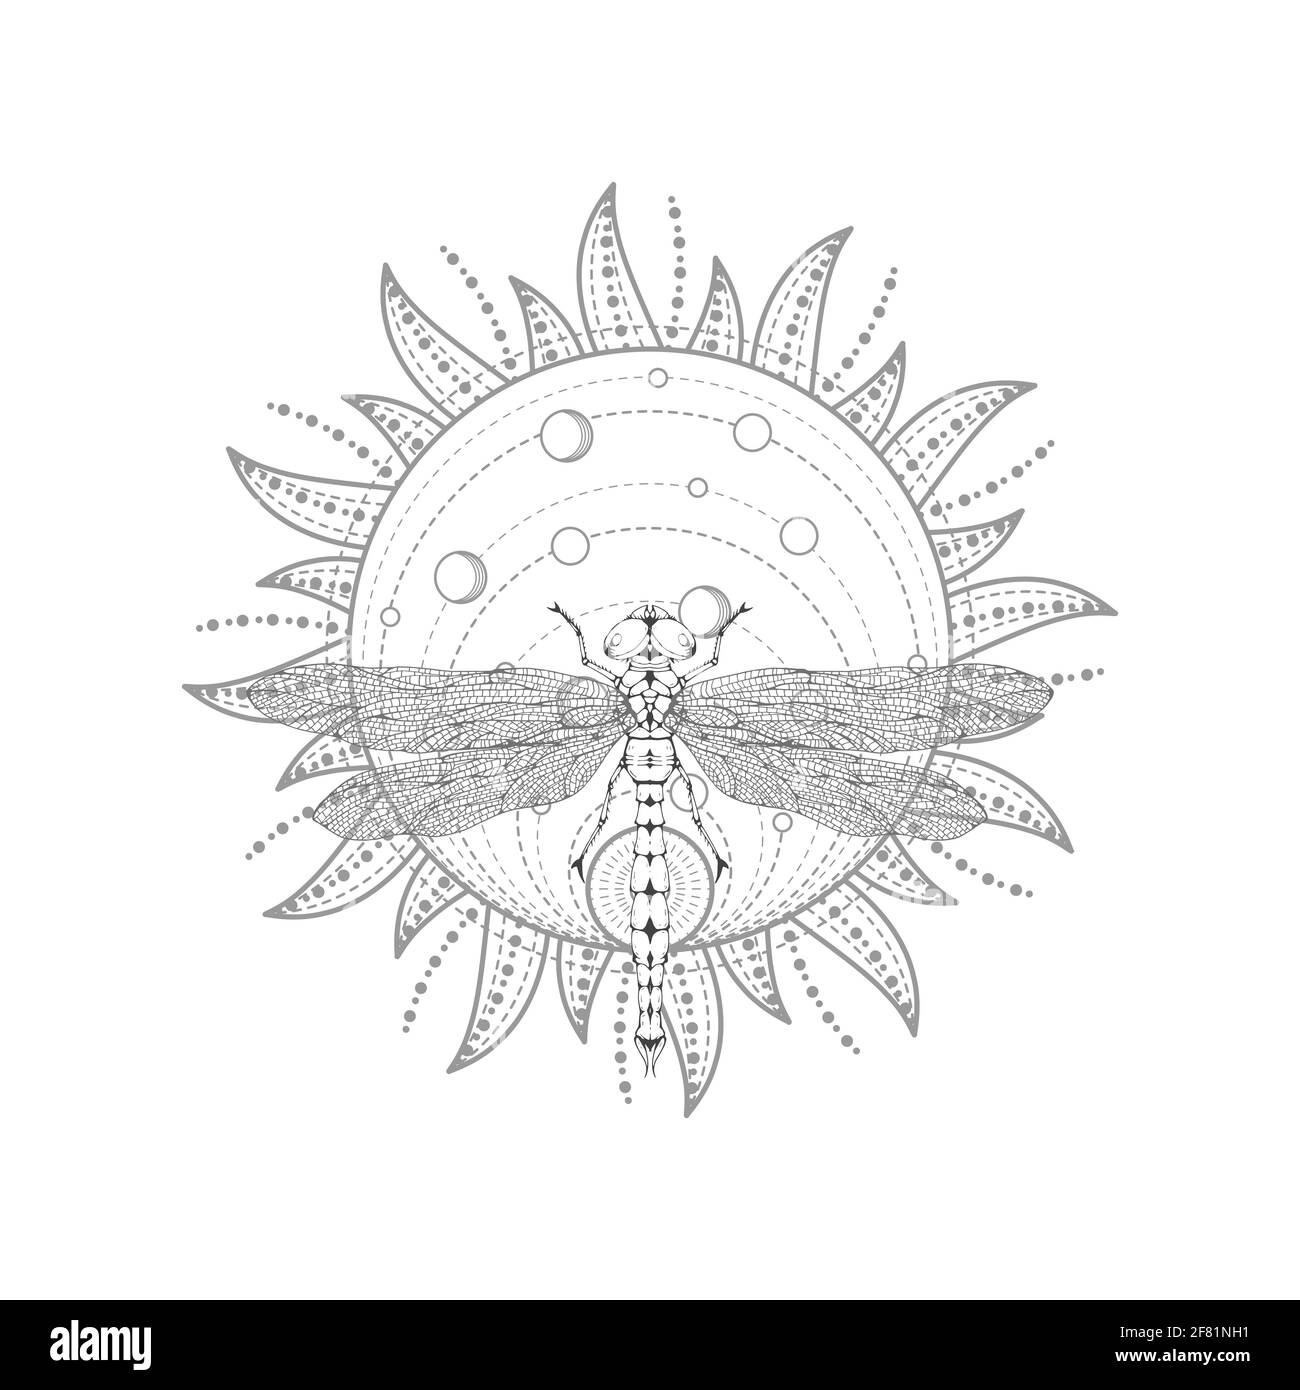 2566 Dragonfly Tattoo Stock Illustrations Cliparts and Royalty Free Dragonfly  Tattoo Vectors